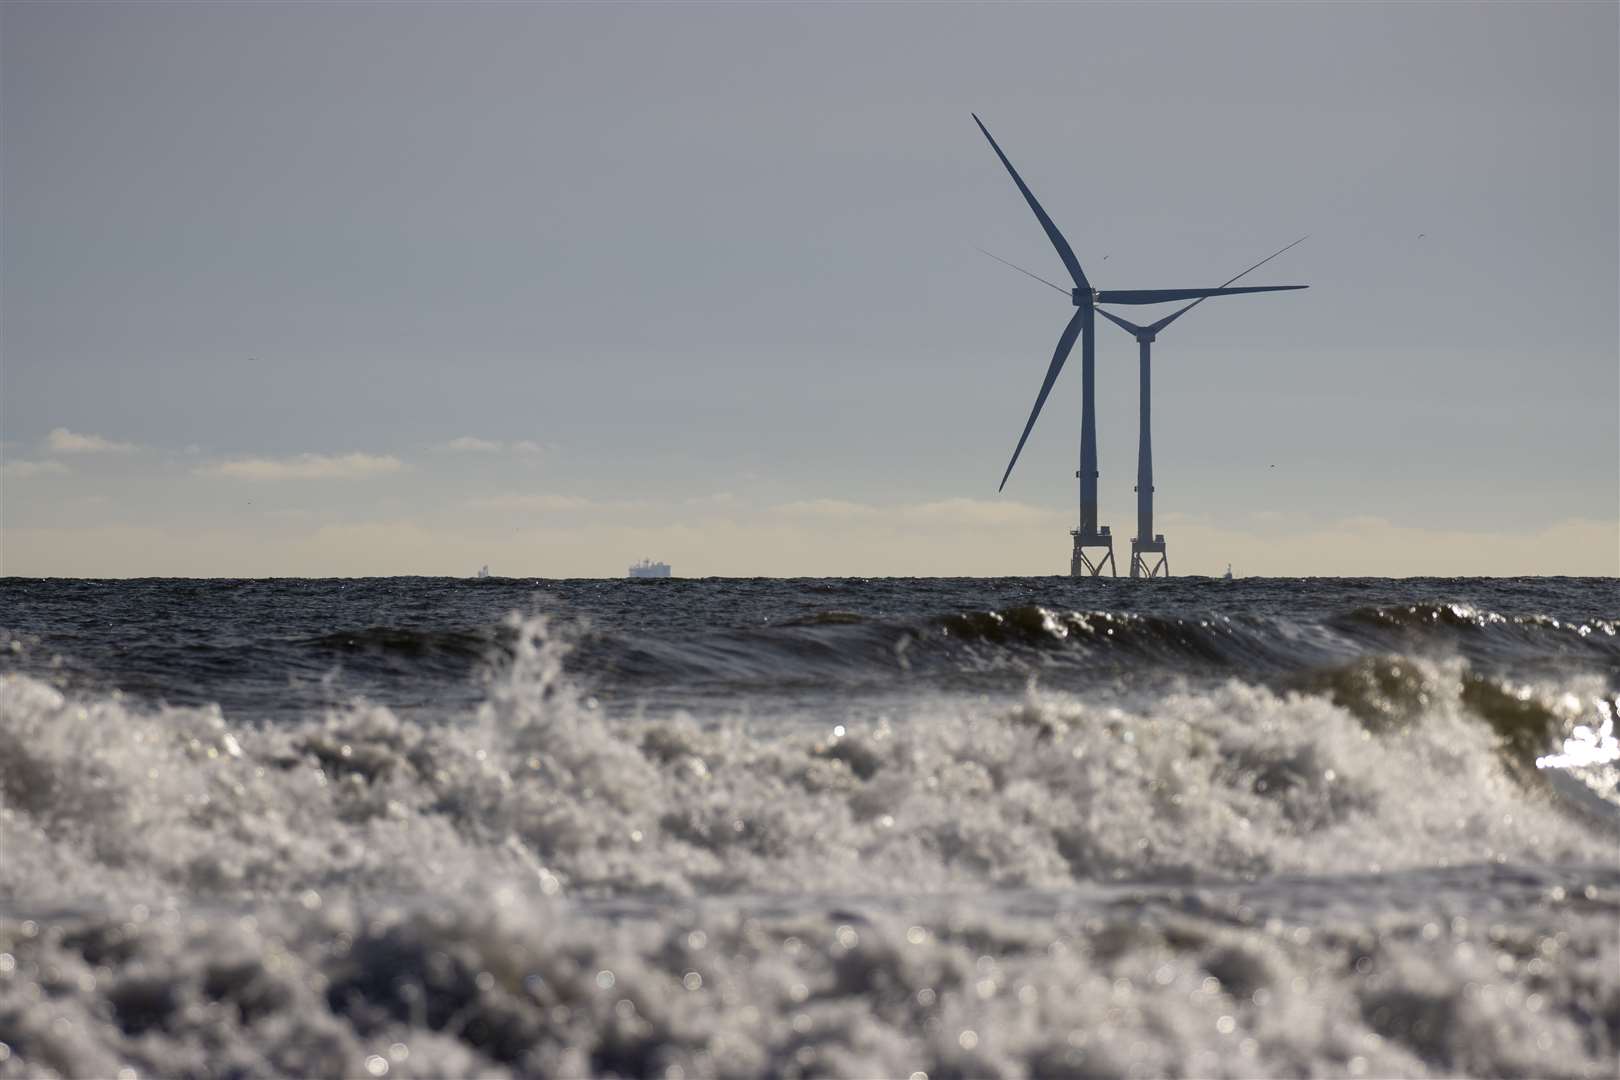 Investment in the UK offshore wind sector is expected to rise to £60 bn by 2026.